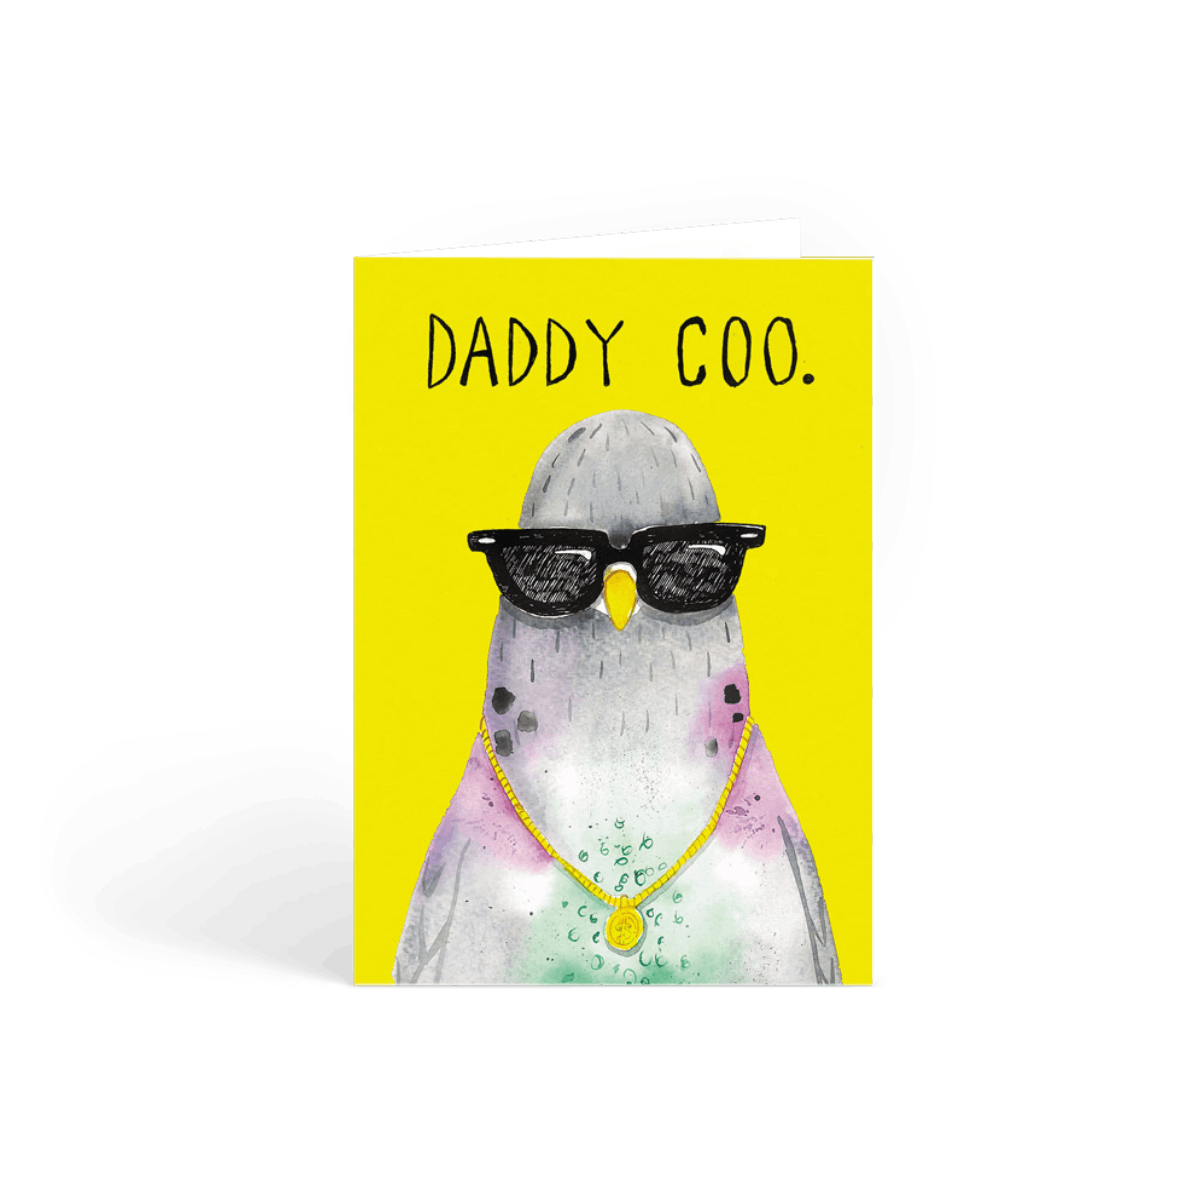 Daddy Coo